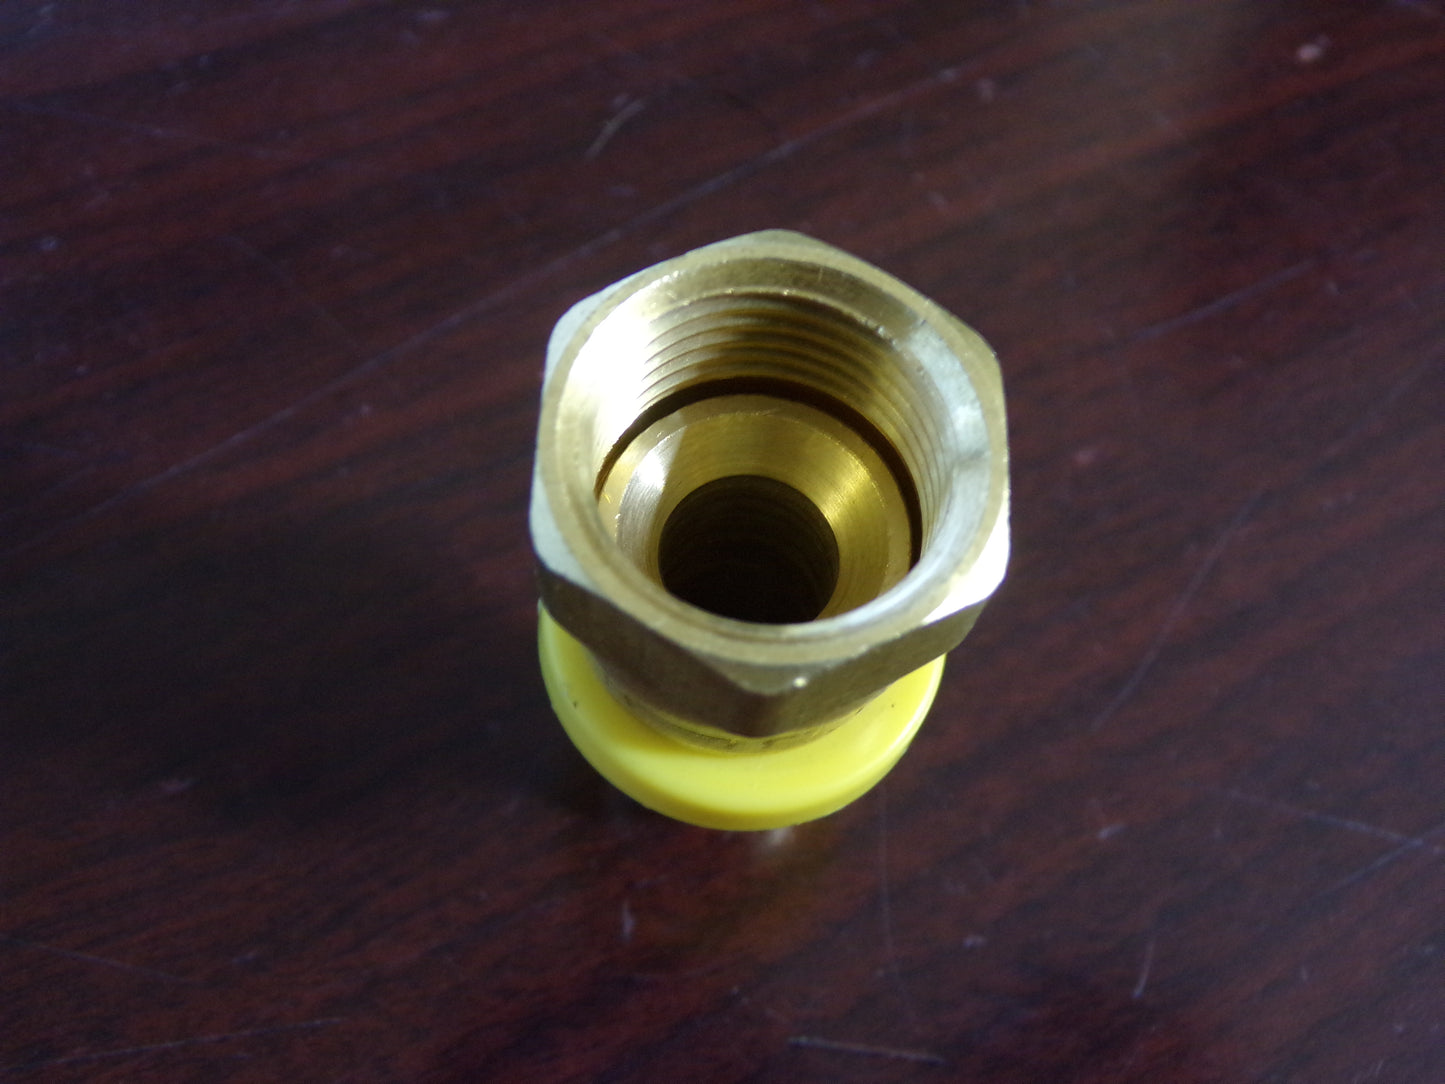 CONTINENTAL Brass Push-On Hose Fitting, 1/2 in x 1/2 in, Female Swivel (CR00578-WTA14)